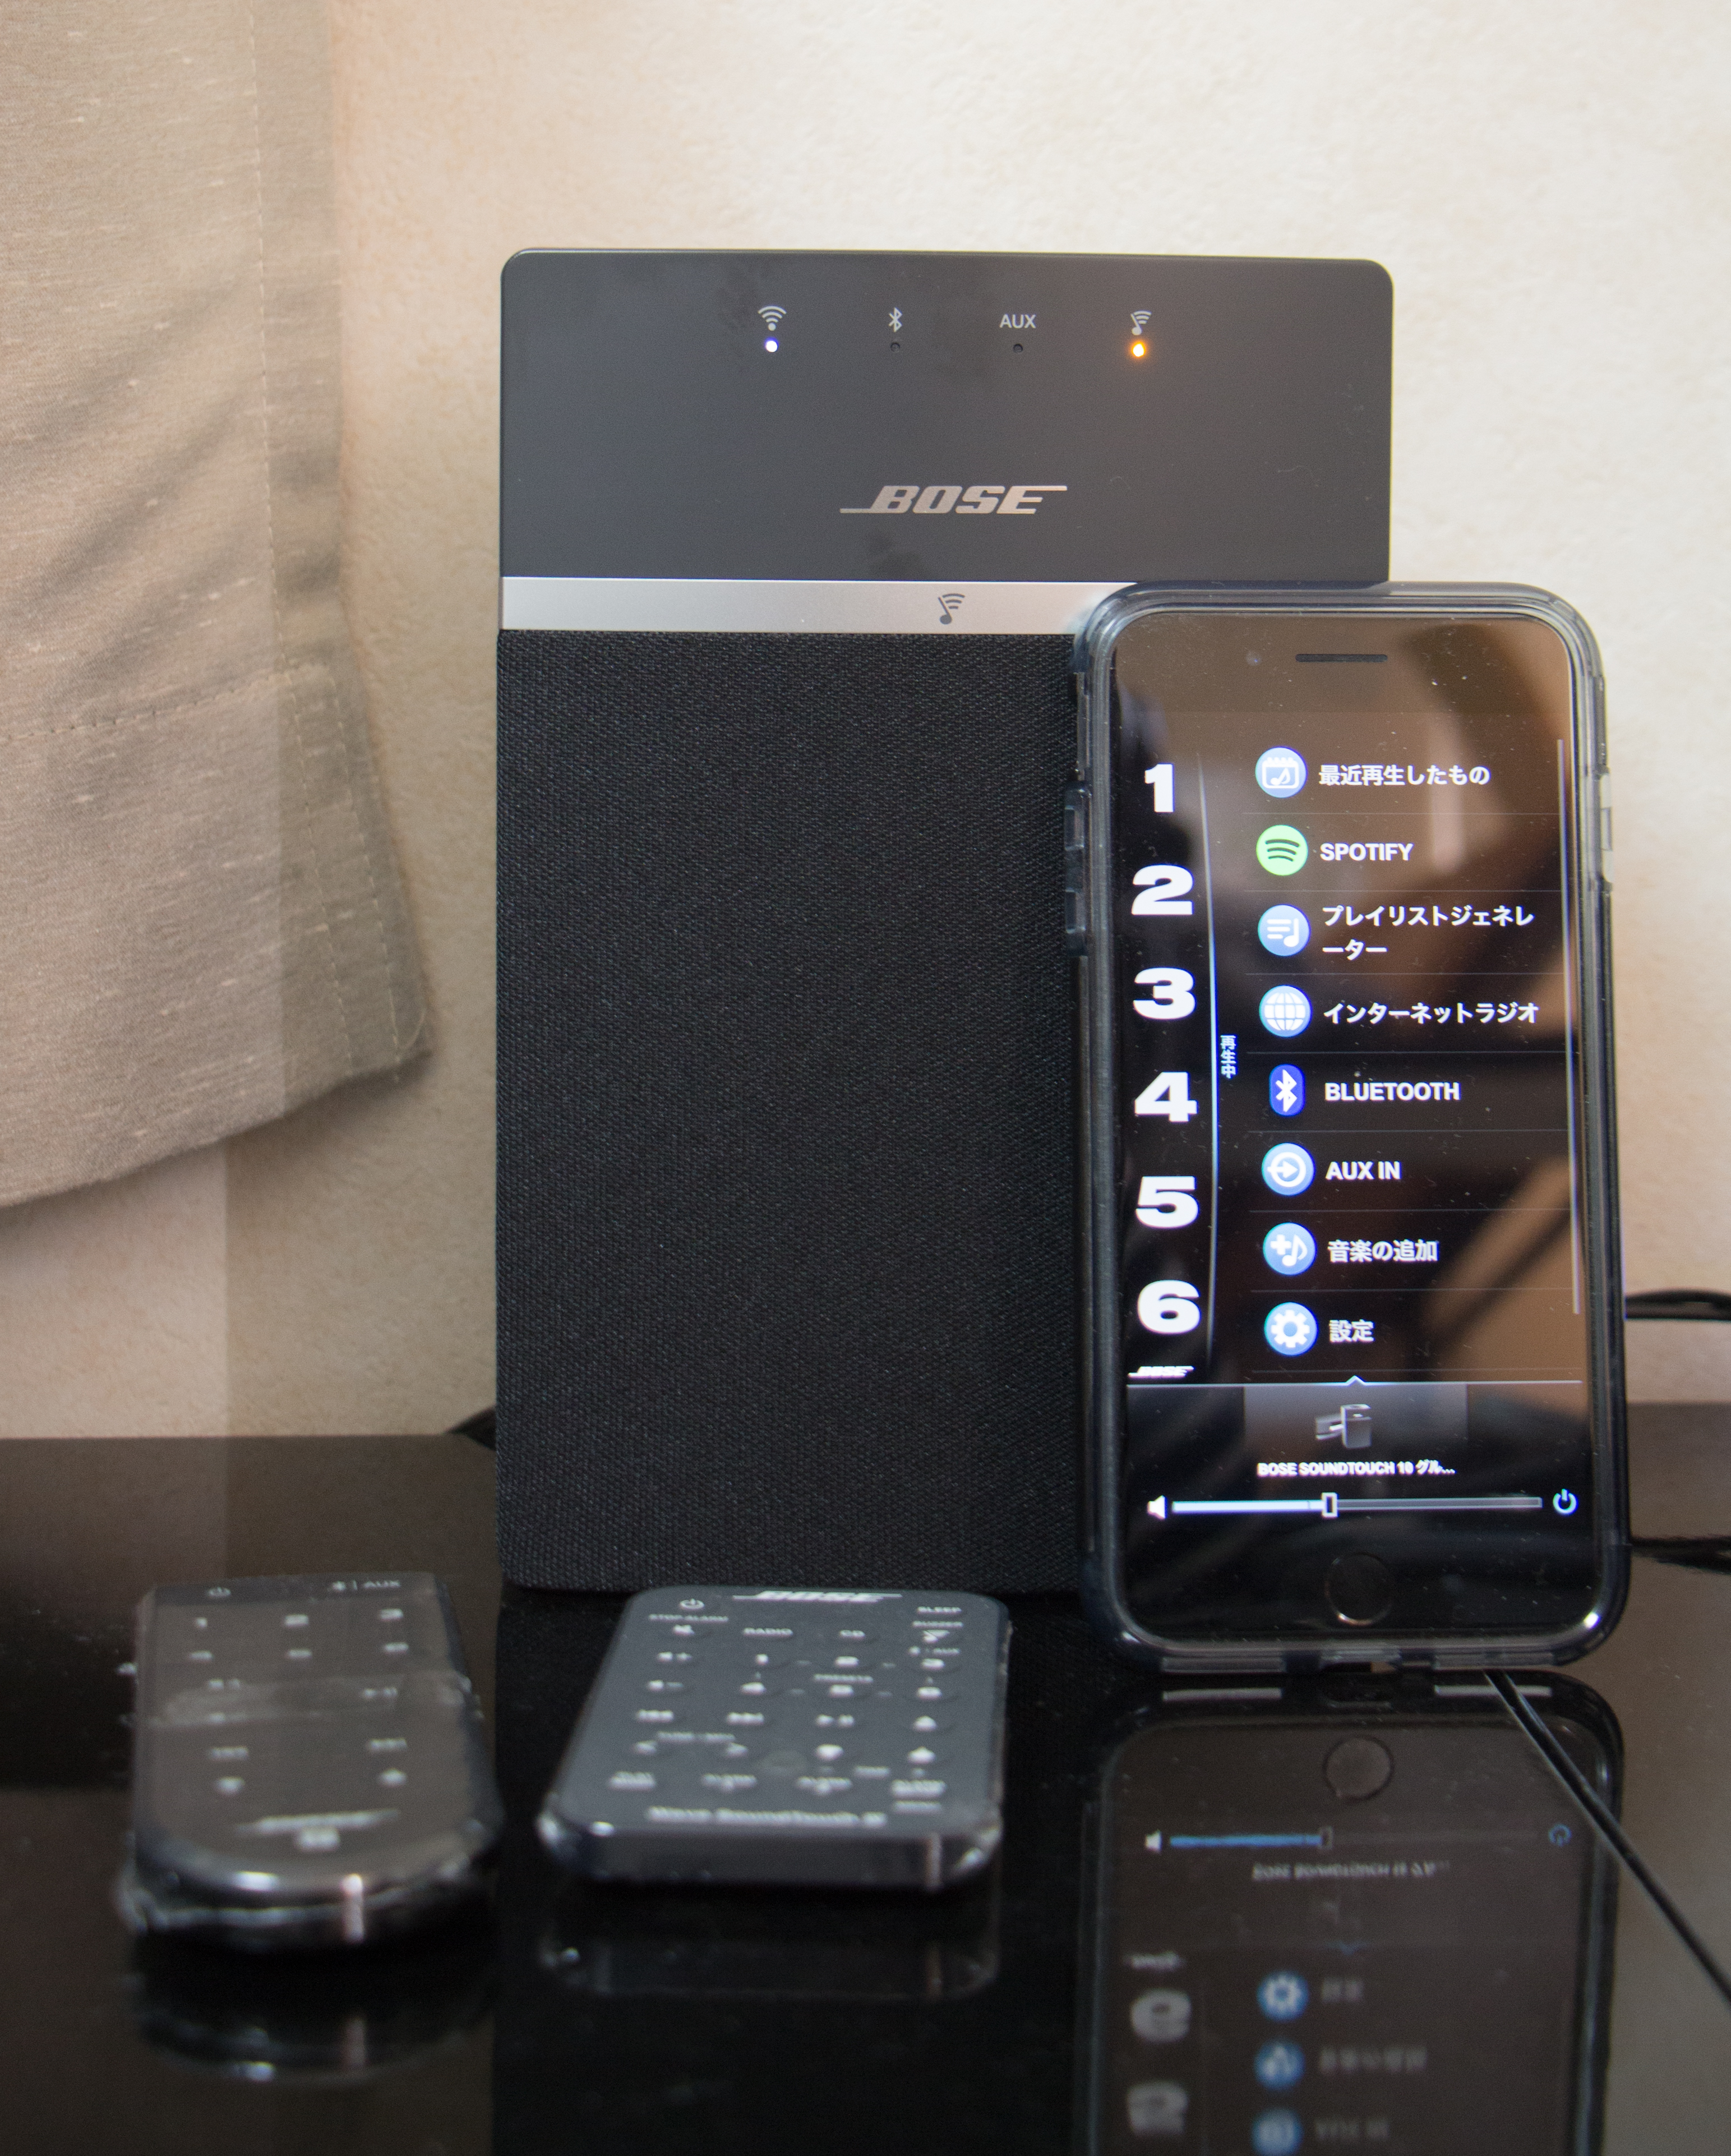 BOSE SoundTouch 10 wireless music system